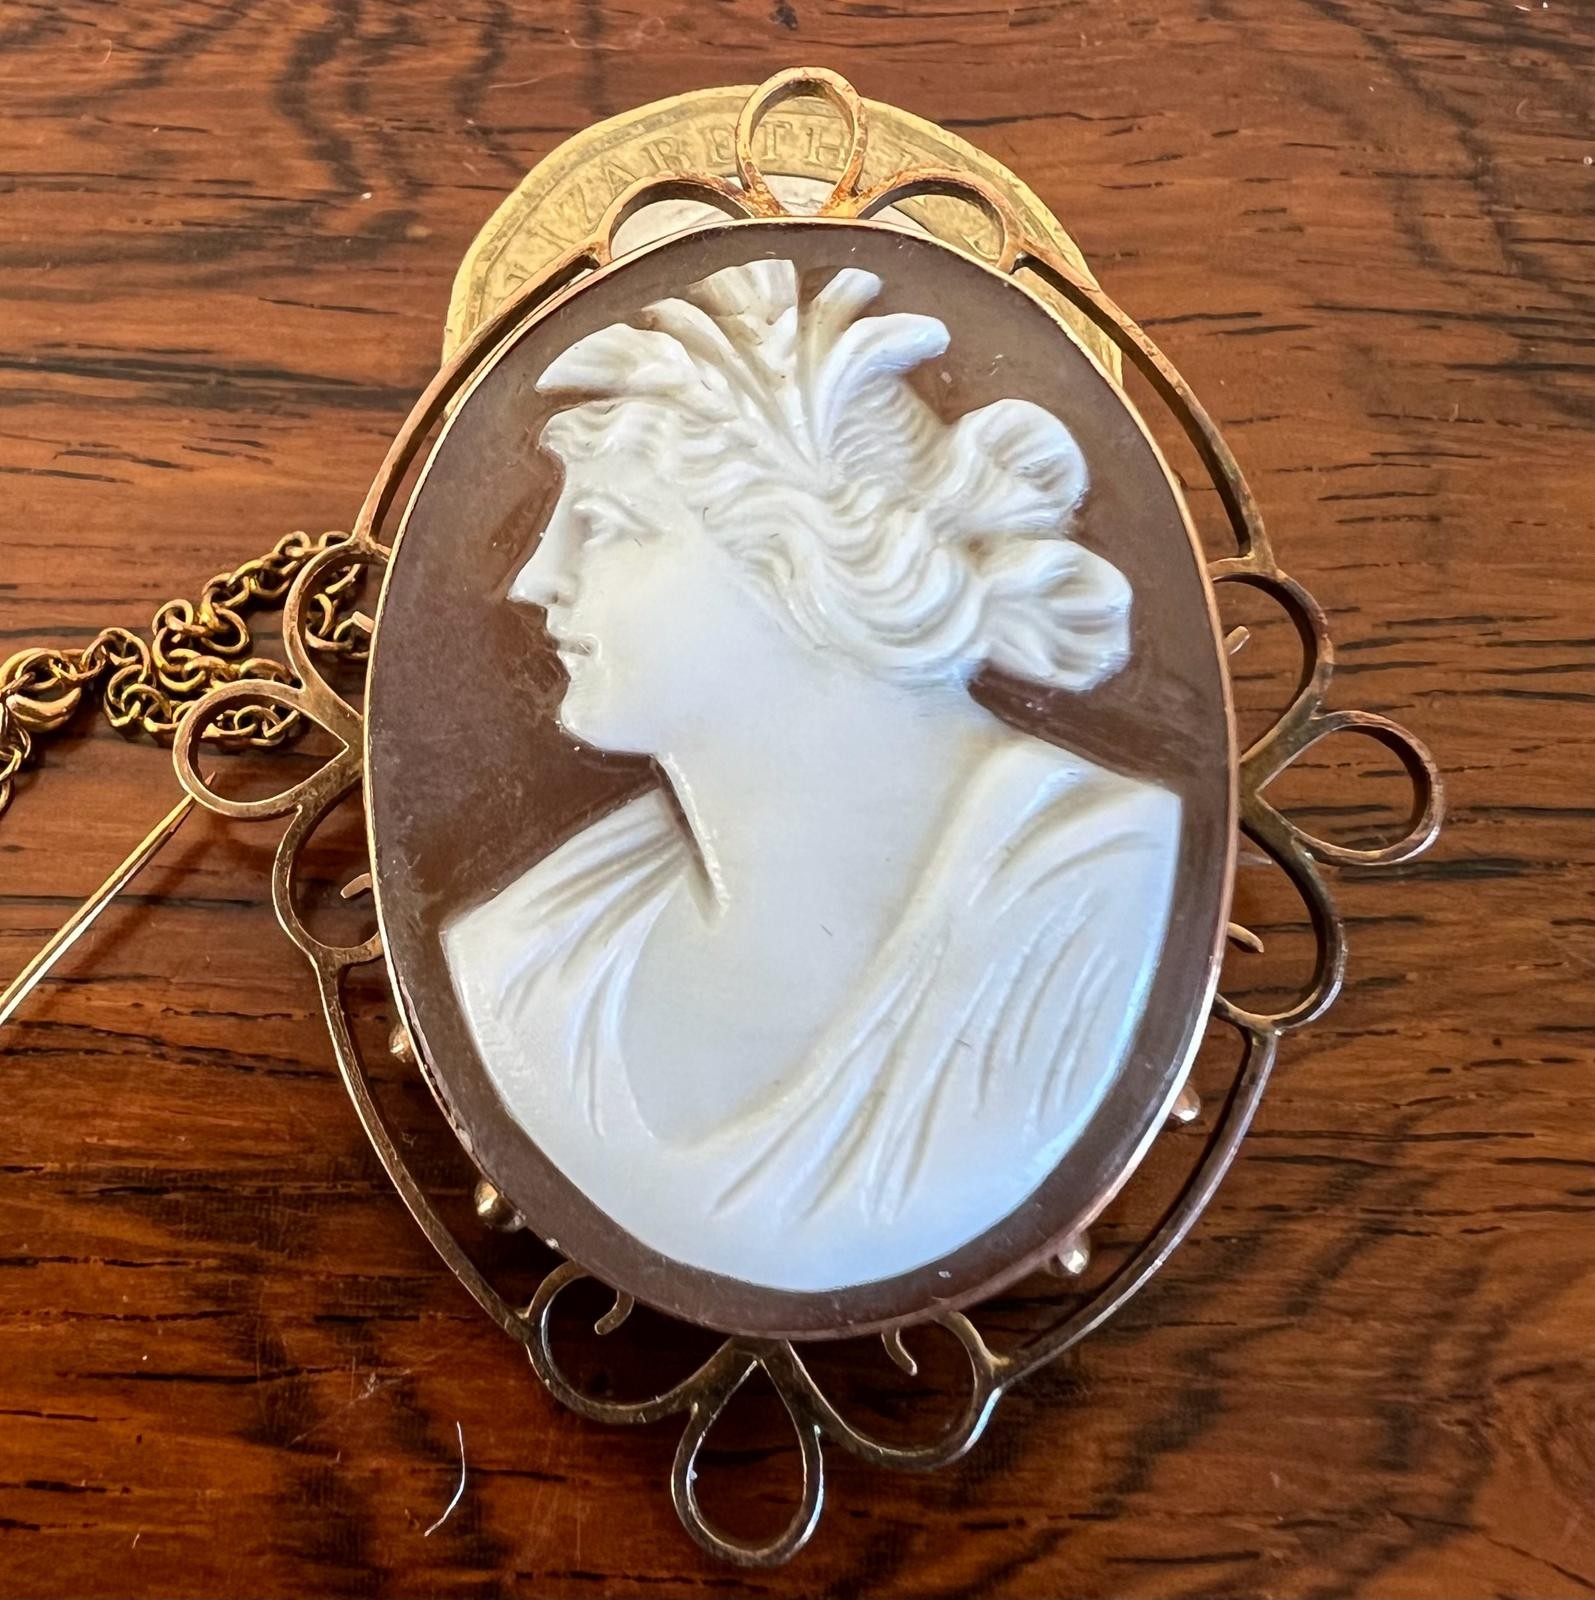 GOOD SHARPLY CARVED SHELL CAMEO BROOCH SET IN 9ct GOLD FRAME, APPROX TOTAL WEIGHT 6.9g